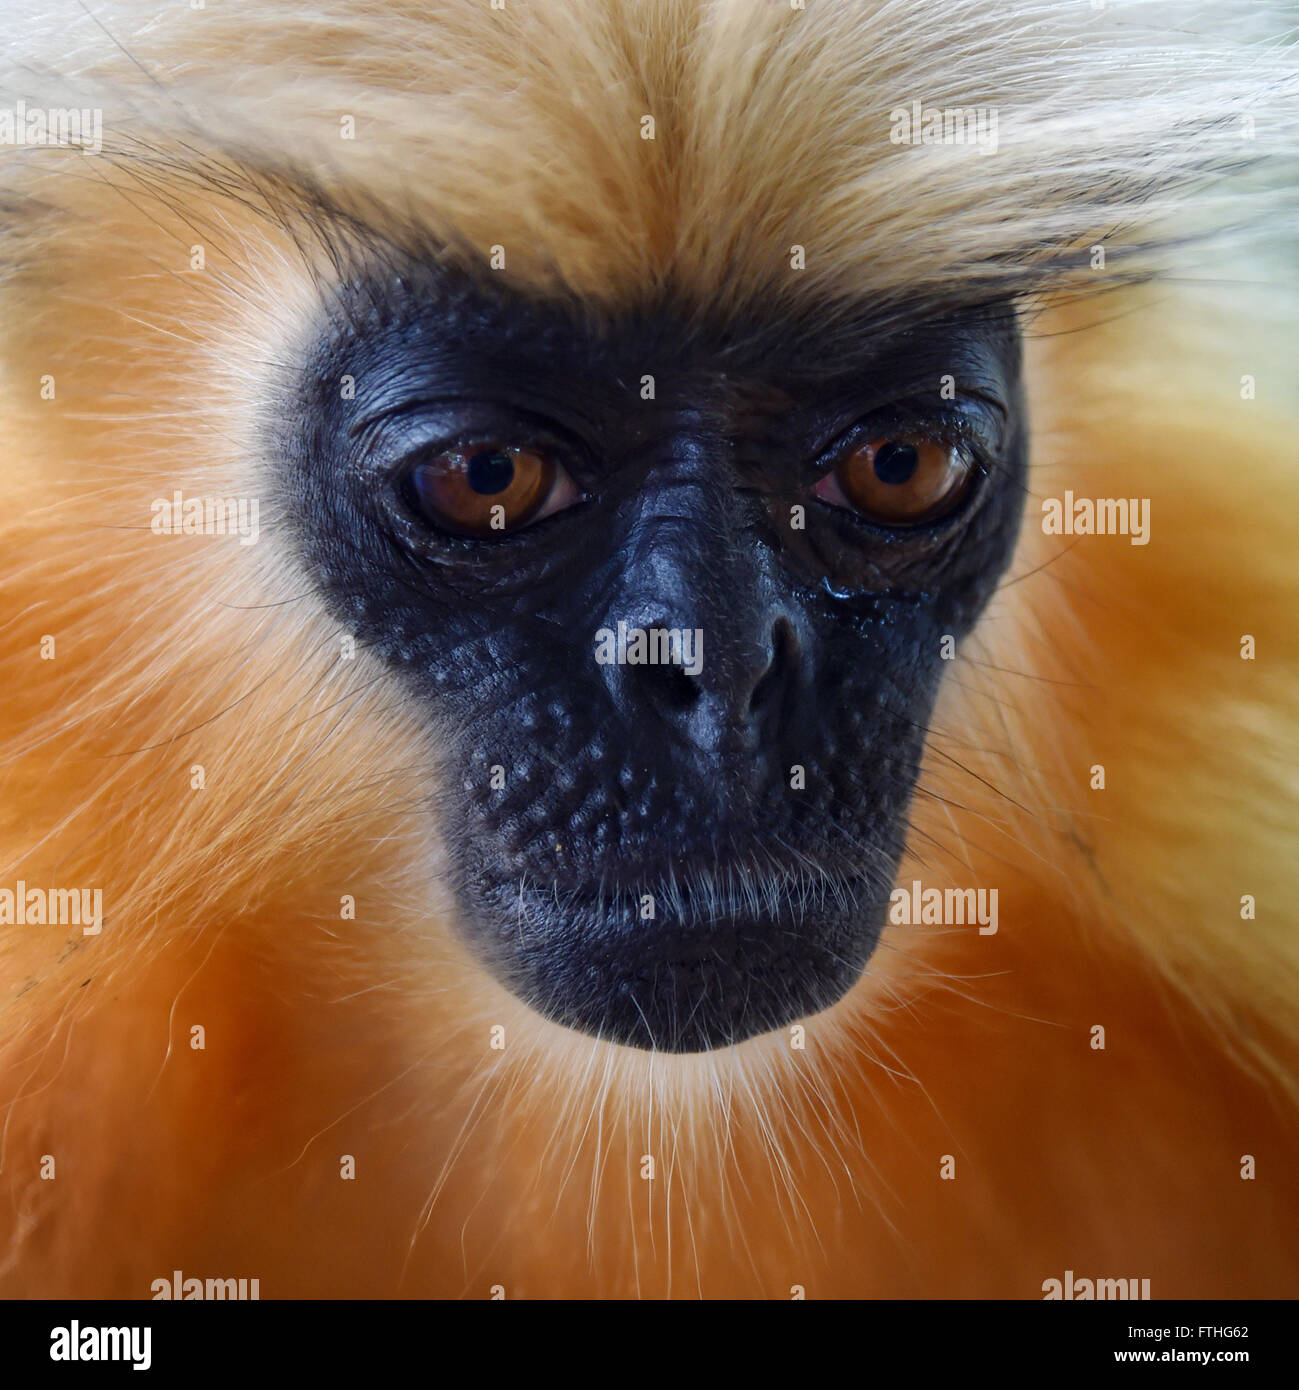 Gee's golden langur (Golden Monkey) an Old World monkey found in Assam,India.It is one of the most endangered primate species Stock Photo